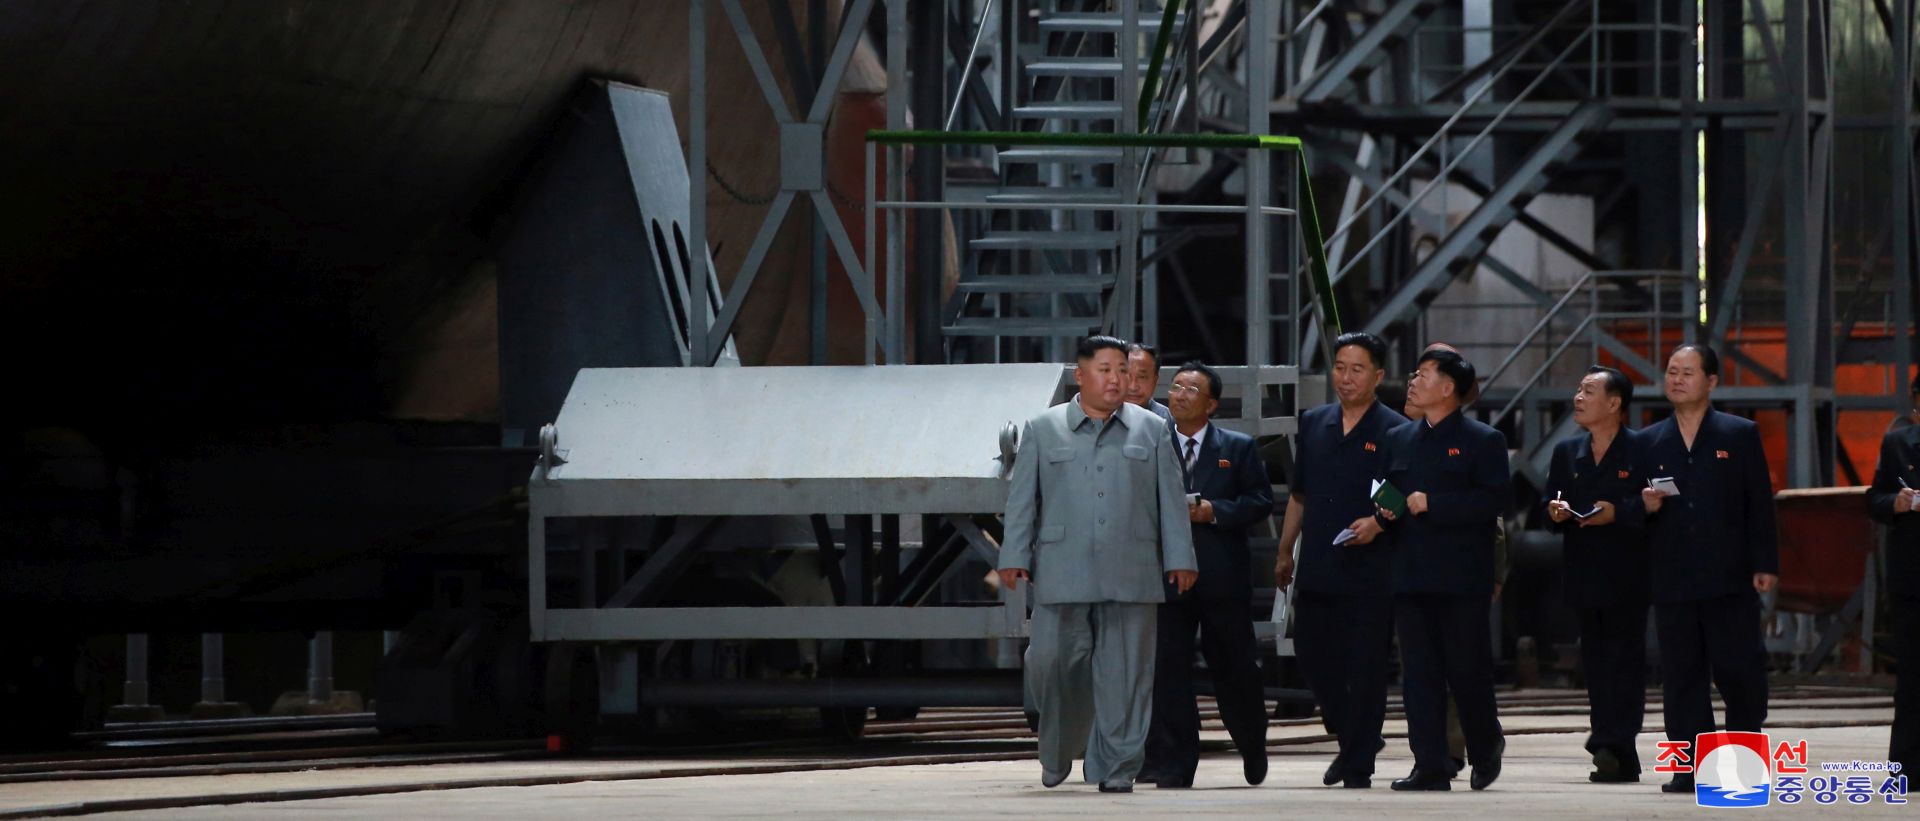 epa07734365 A photo released by the official North Korean Central News Agency (KCNA) on 23 July 2019 shows Kim Jong-Un (C), chairman of the Workers' Party of Korea, chairman of the State Affairs Commission of the Democratic People's Republic of Korea, and supreme commander of the armed forces of the DPRK, made a round of the newly-laid down submarine at an undisclosed location in North Korea.  EPA/KCNA   EDITORIAL USE ONLY